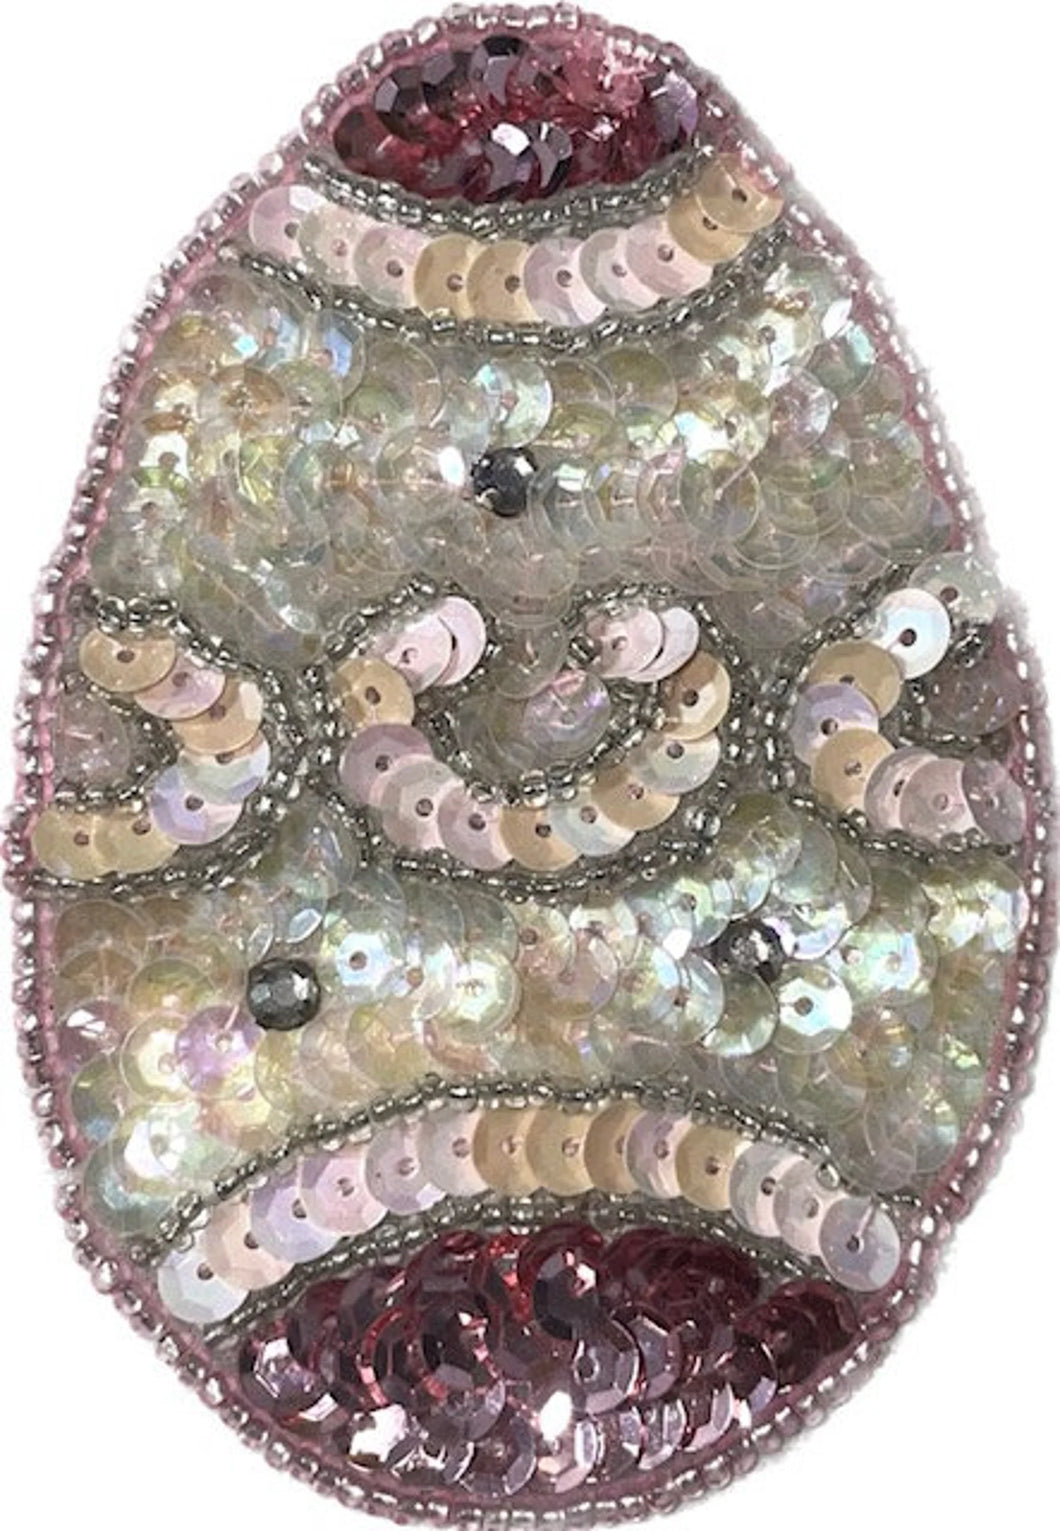 Easter Egg with Pink, Cream and Iridescent Sequins and Beads 3.5